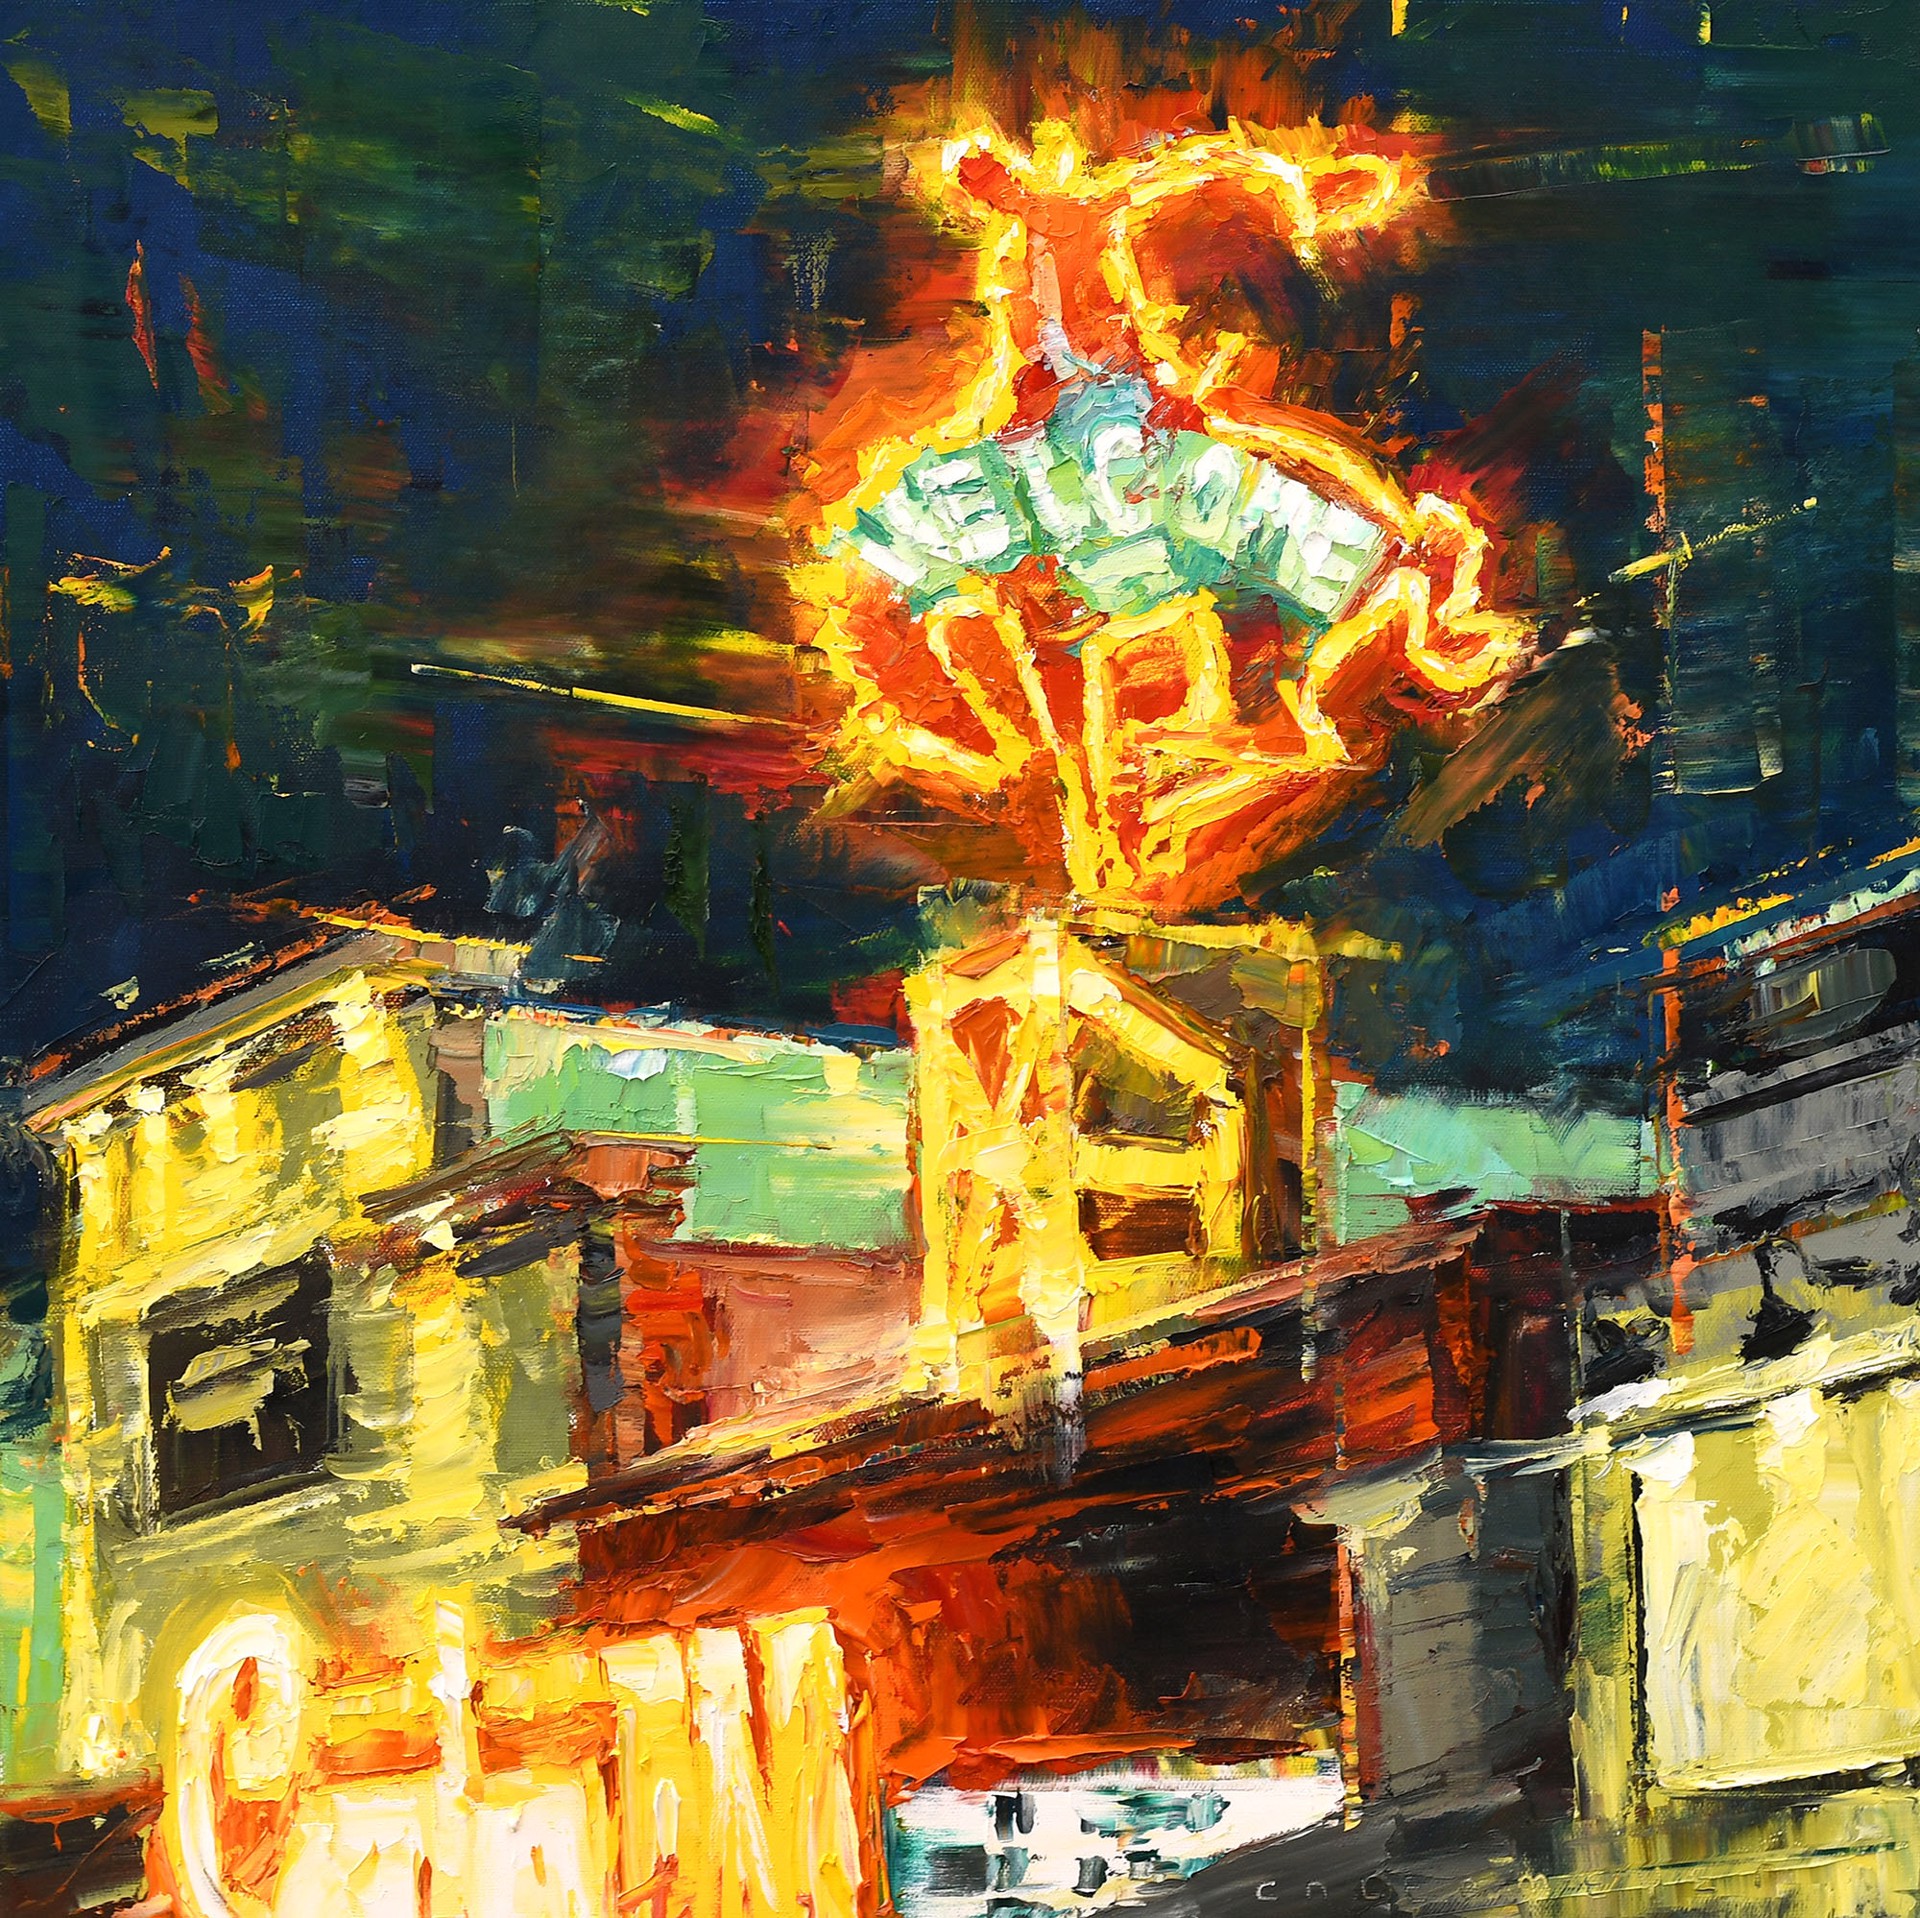 Original Oil Painting By Caleb Meyer Featuring The Million Dollar Cowboy Bar Neon Sign At Night